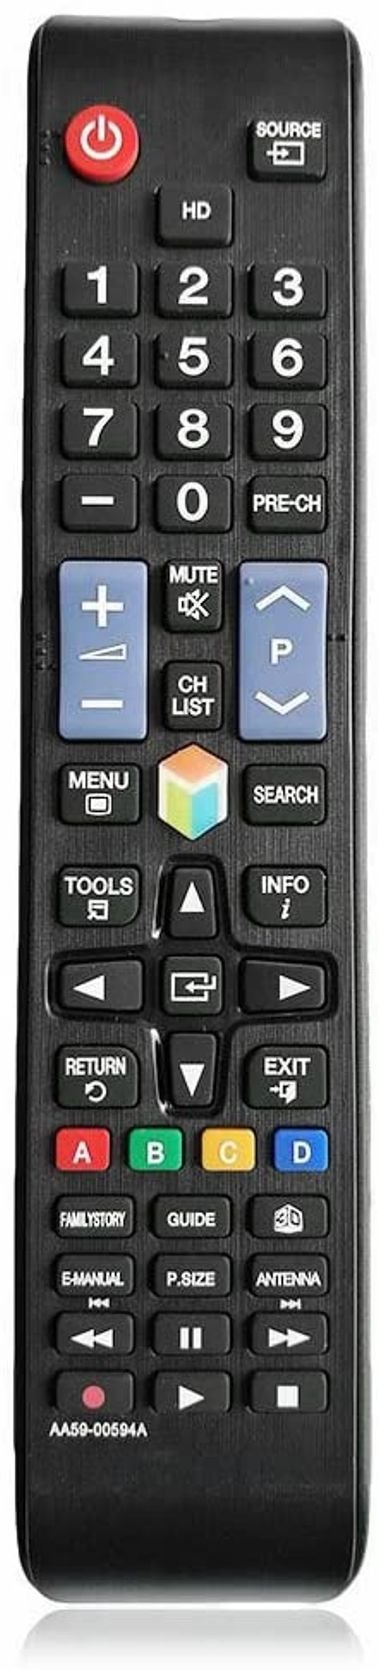 Samsung Remote Control, supports Samsung smart screens, Ultra wide angle transmission, Black